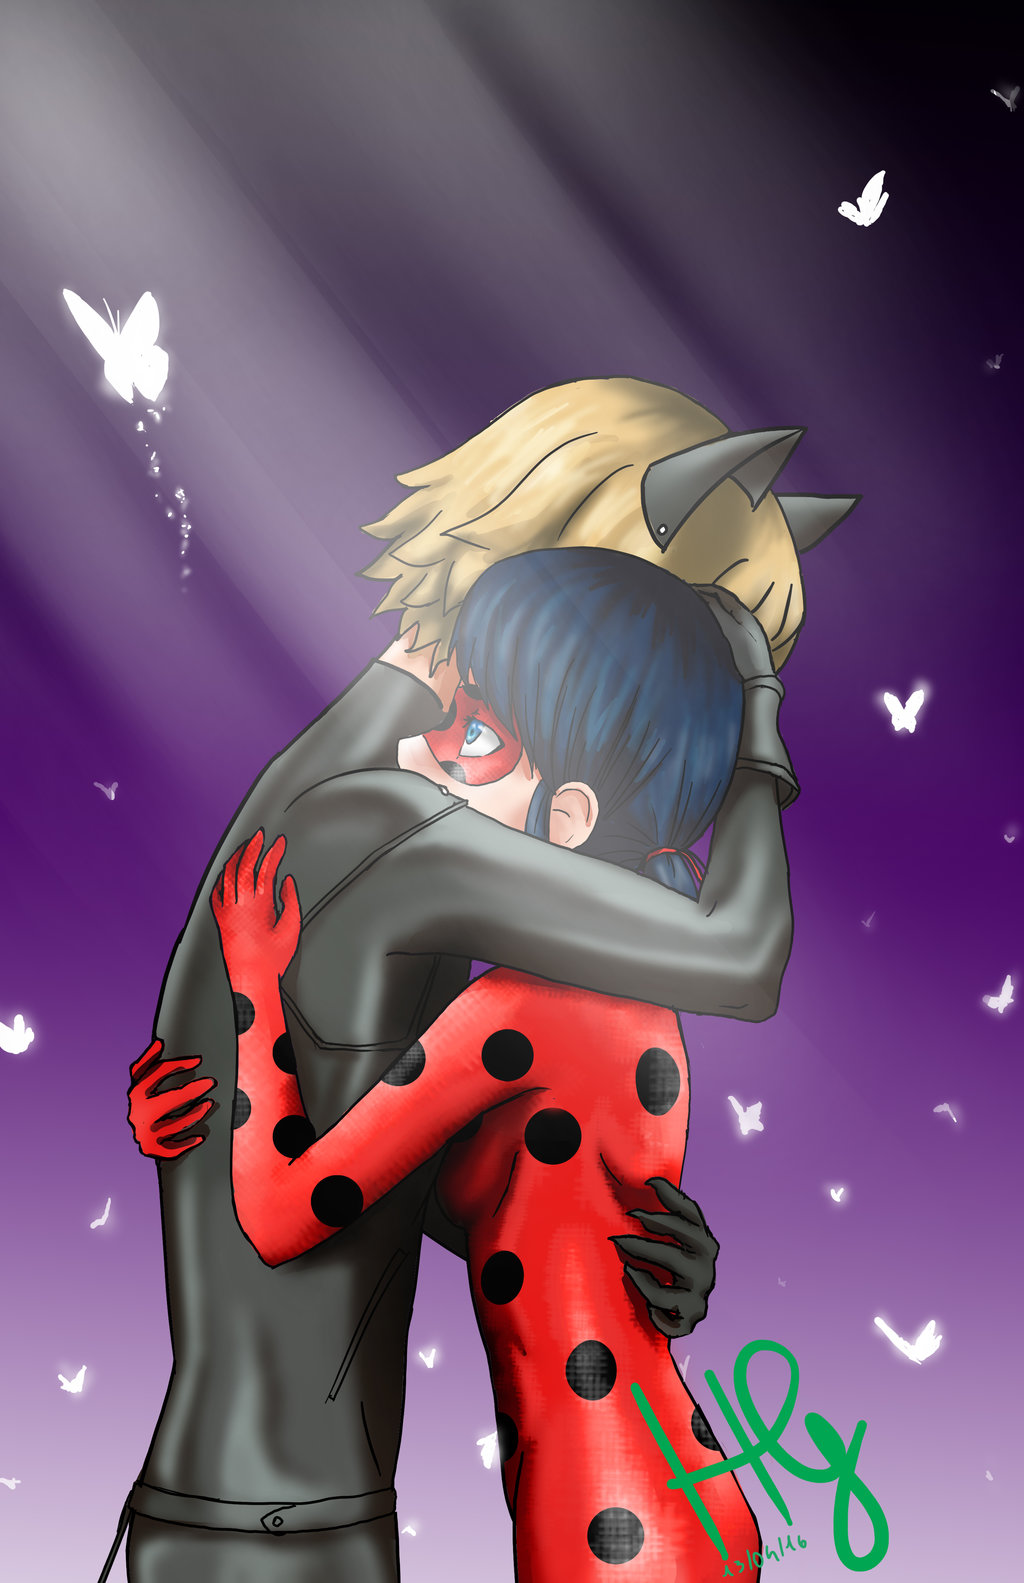 Ladybug Image And Chat Noir HD Wallpaper Background